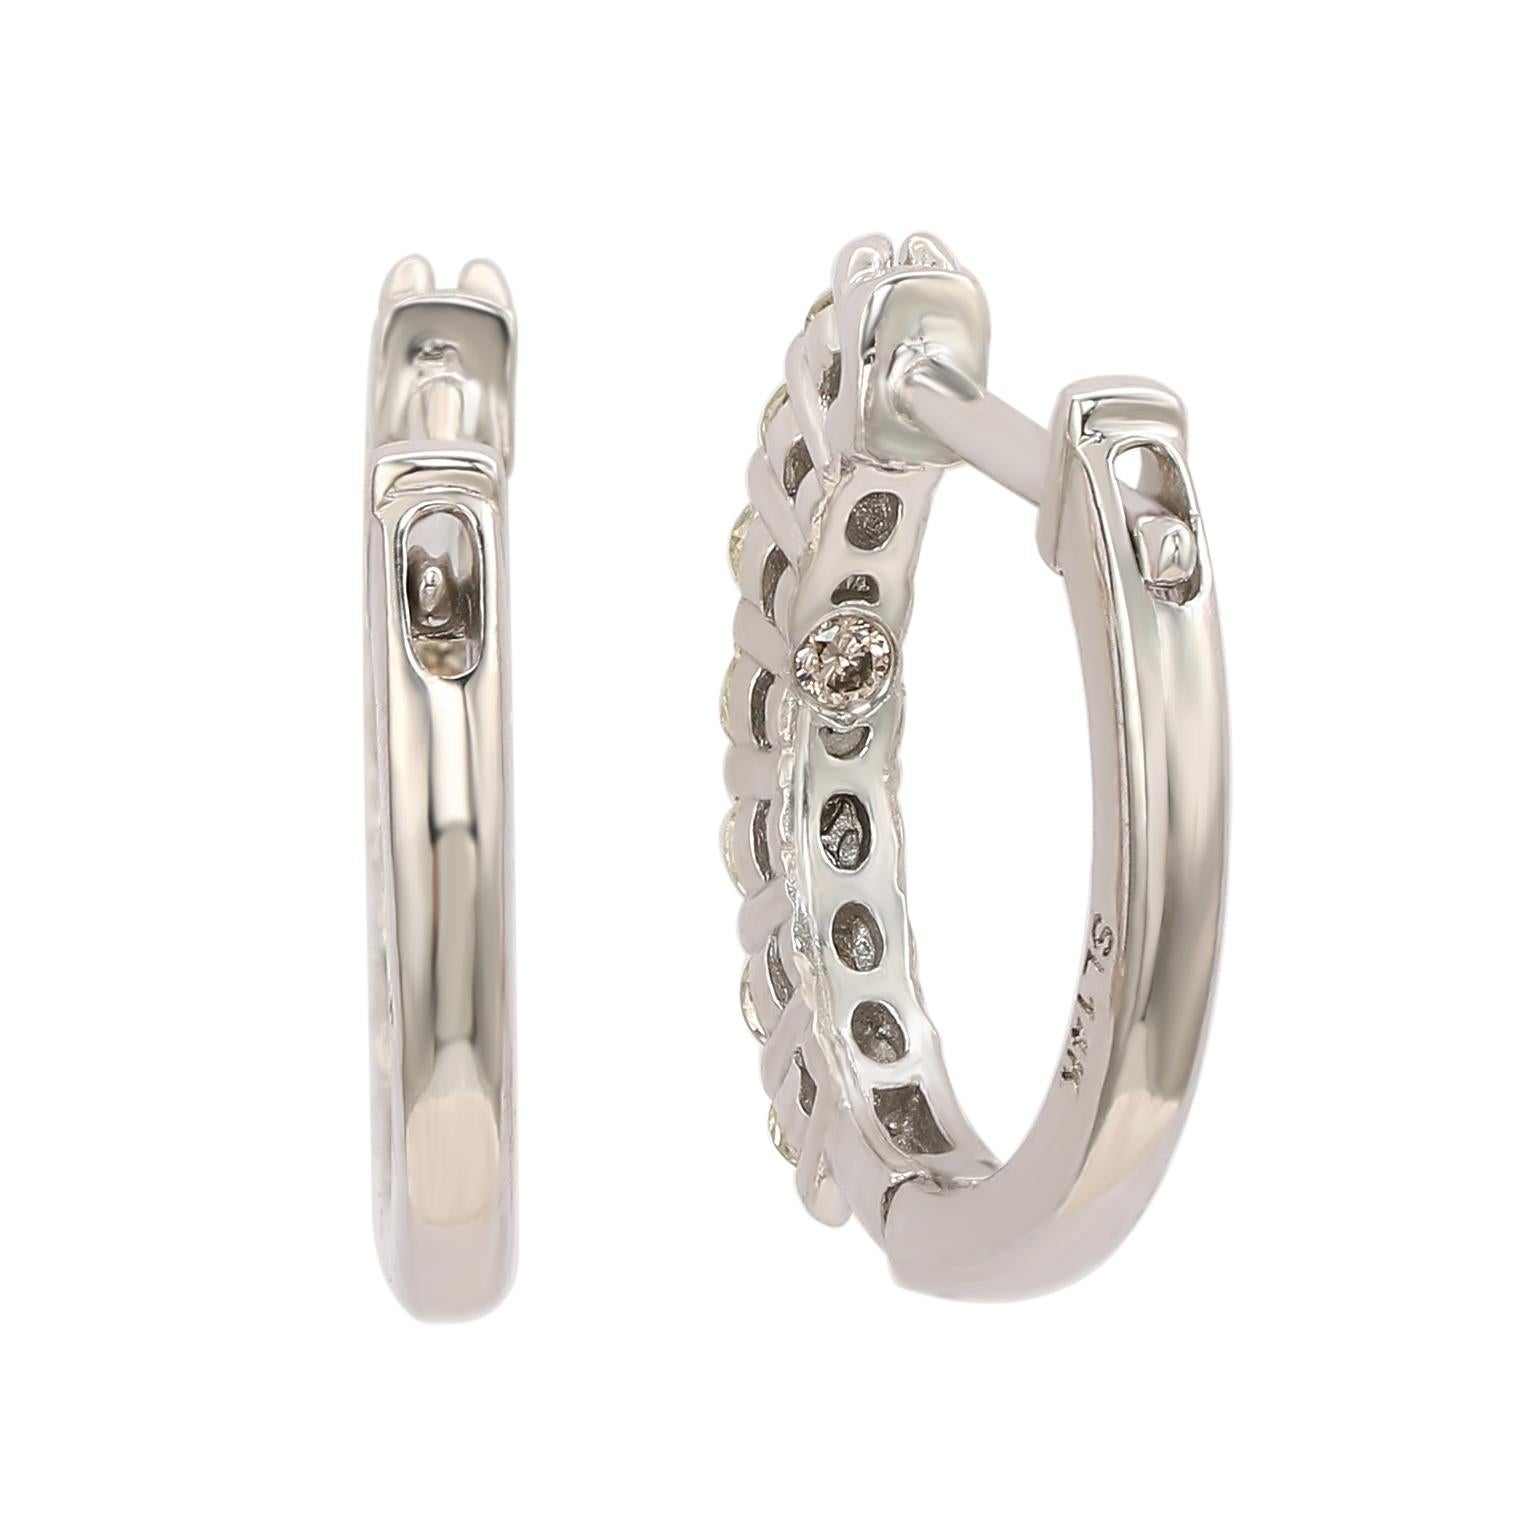  Suzy Levian's 14k white gold hoop earrings feature an outer design studded with 14 round cut diamonds (1.00ct. t.w.). Approximate diameter: 16 mm. Jewelry Type: Fine
Gold Karat: 14k
Total Diamond Weight: 1.00 CTTW
Diamond Cut: Round
Style: Hoop,